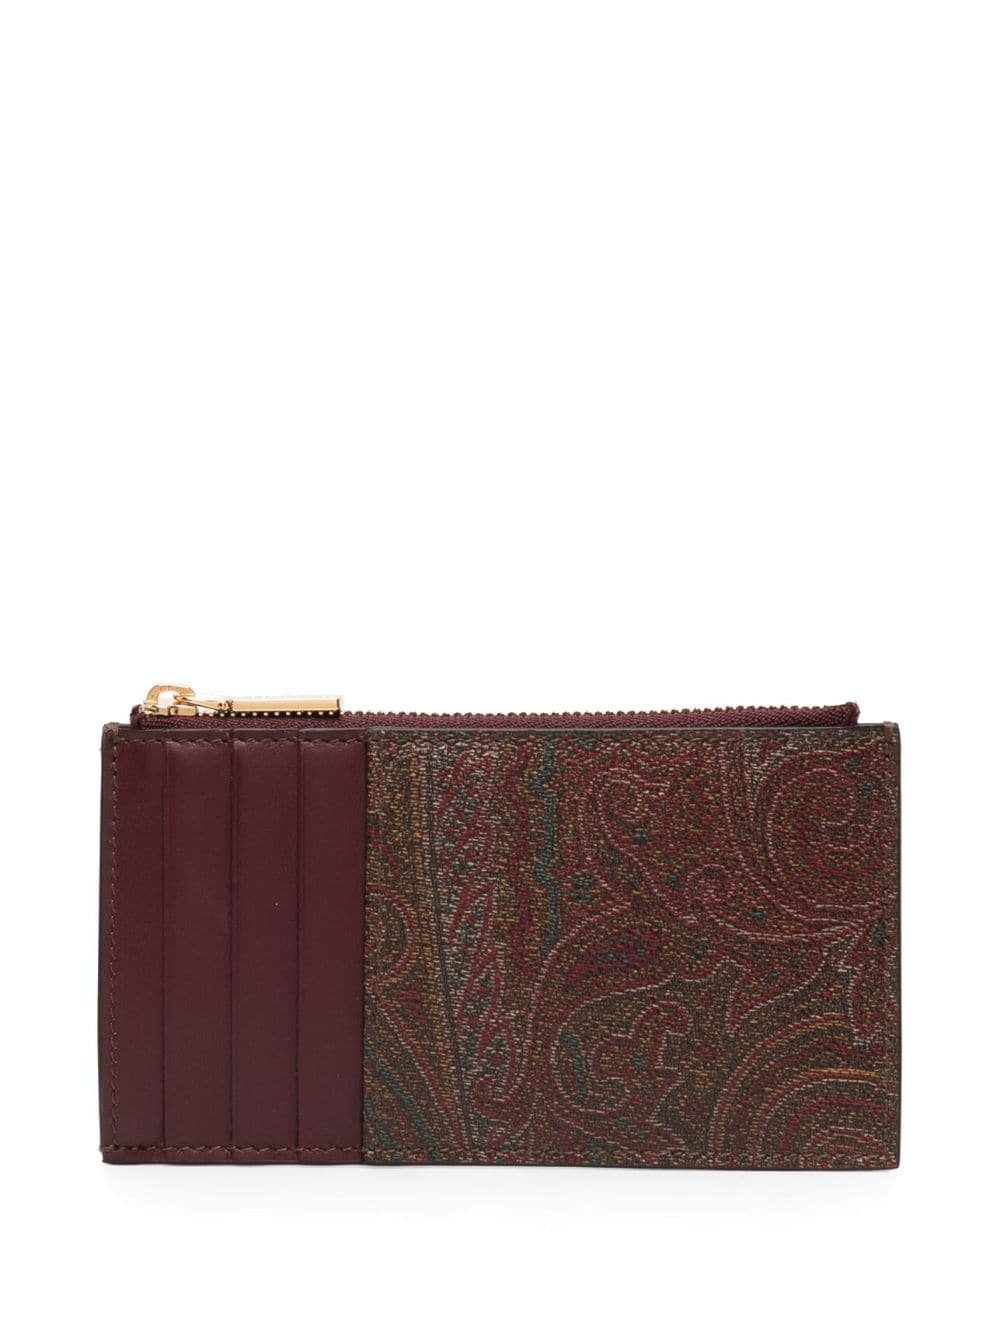 logo-embroidered jacquard leather wallet - 2